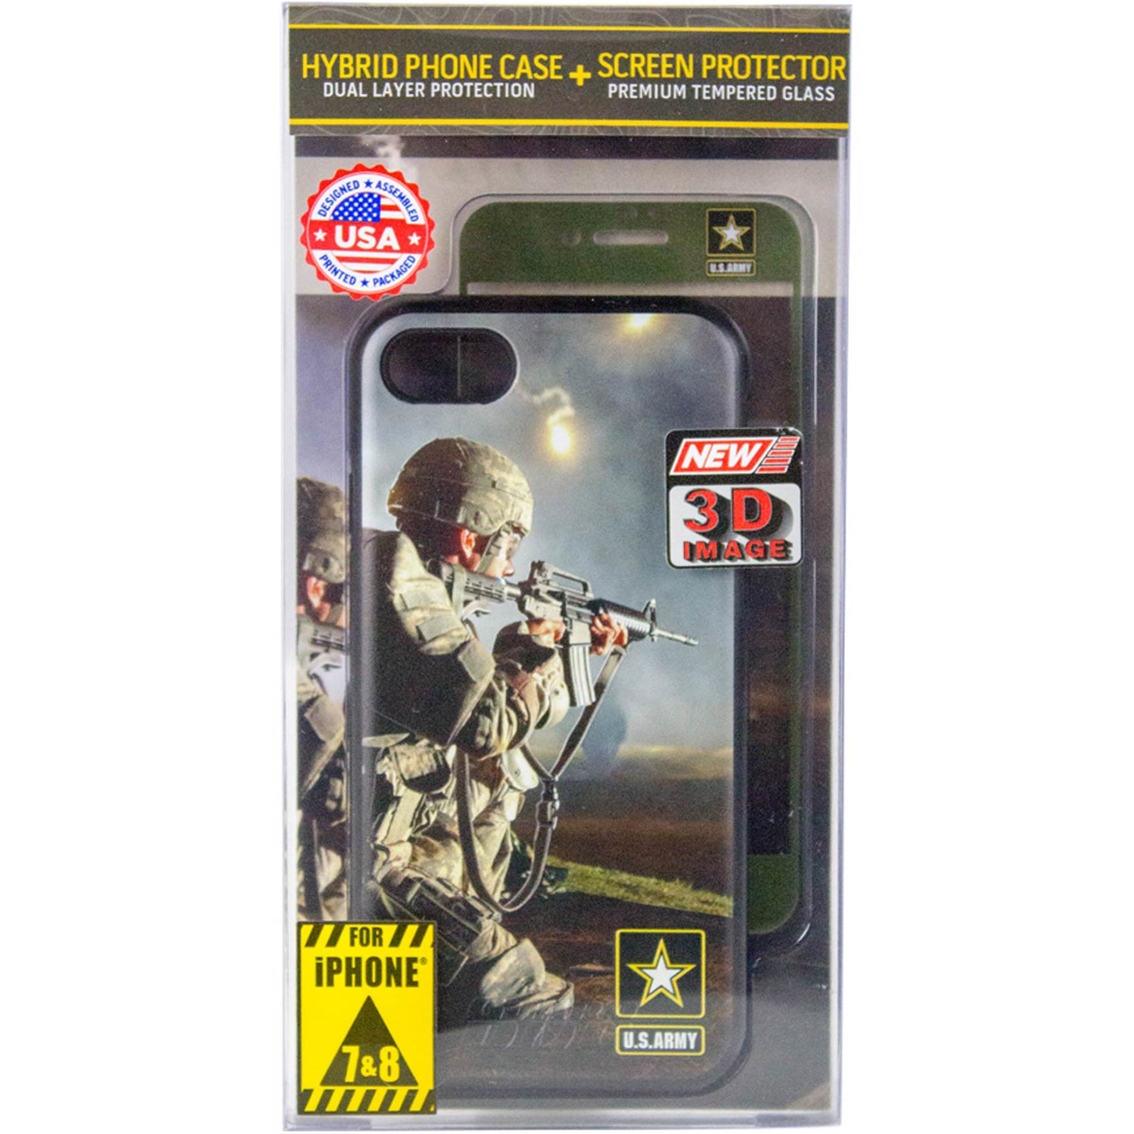 US Army - Full Print Hybrid Case for iPhone 7/8 - Green - Image 5 of 5